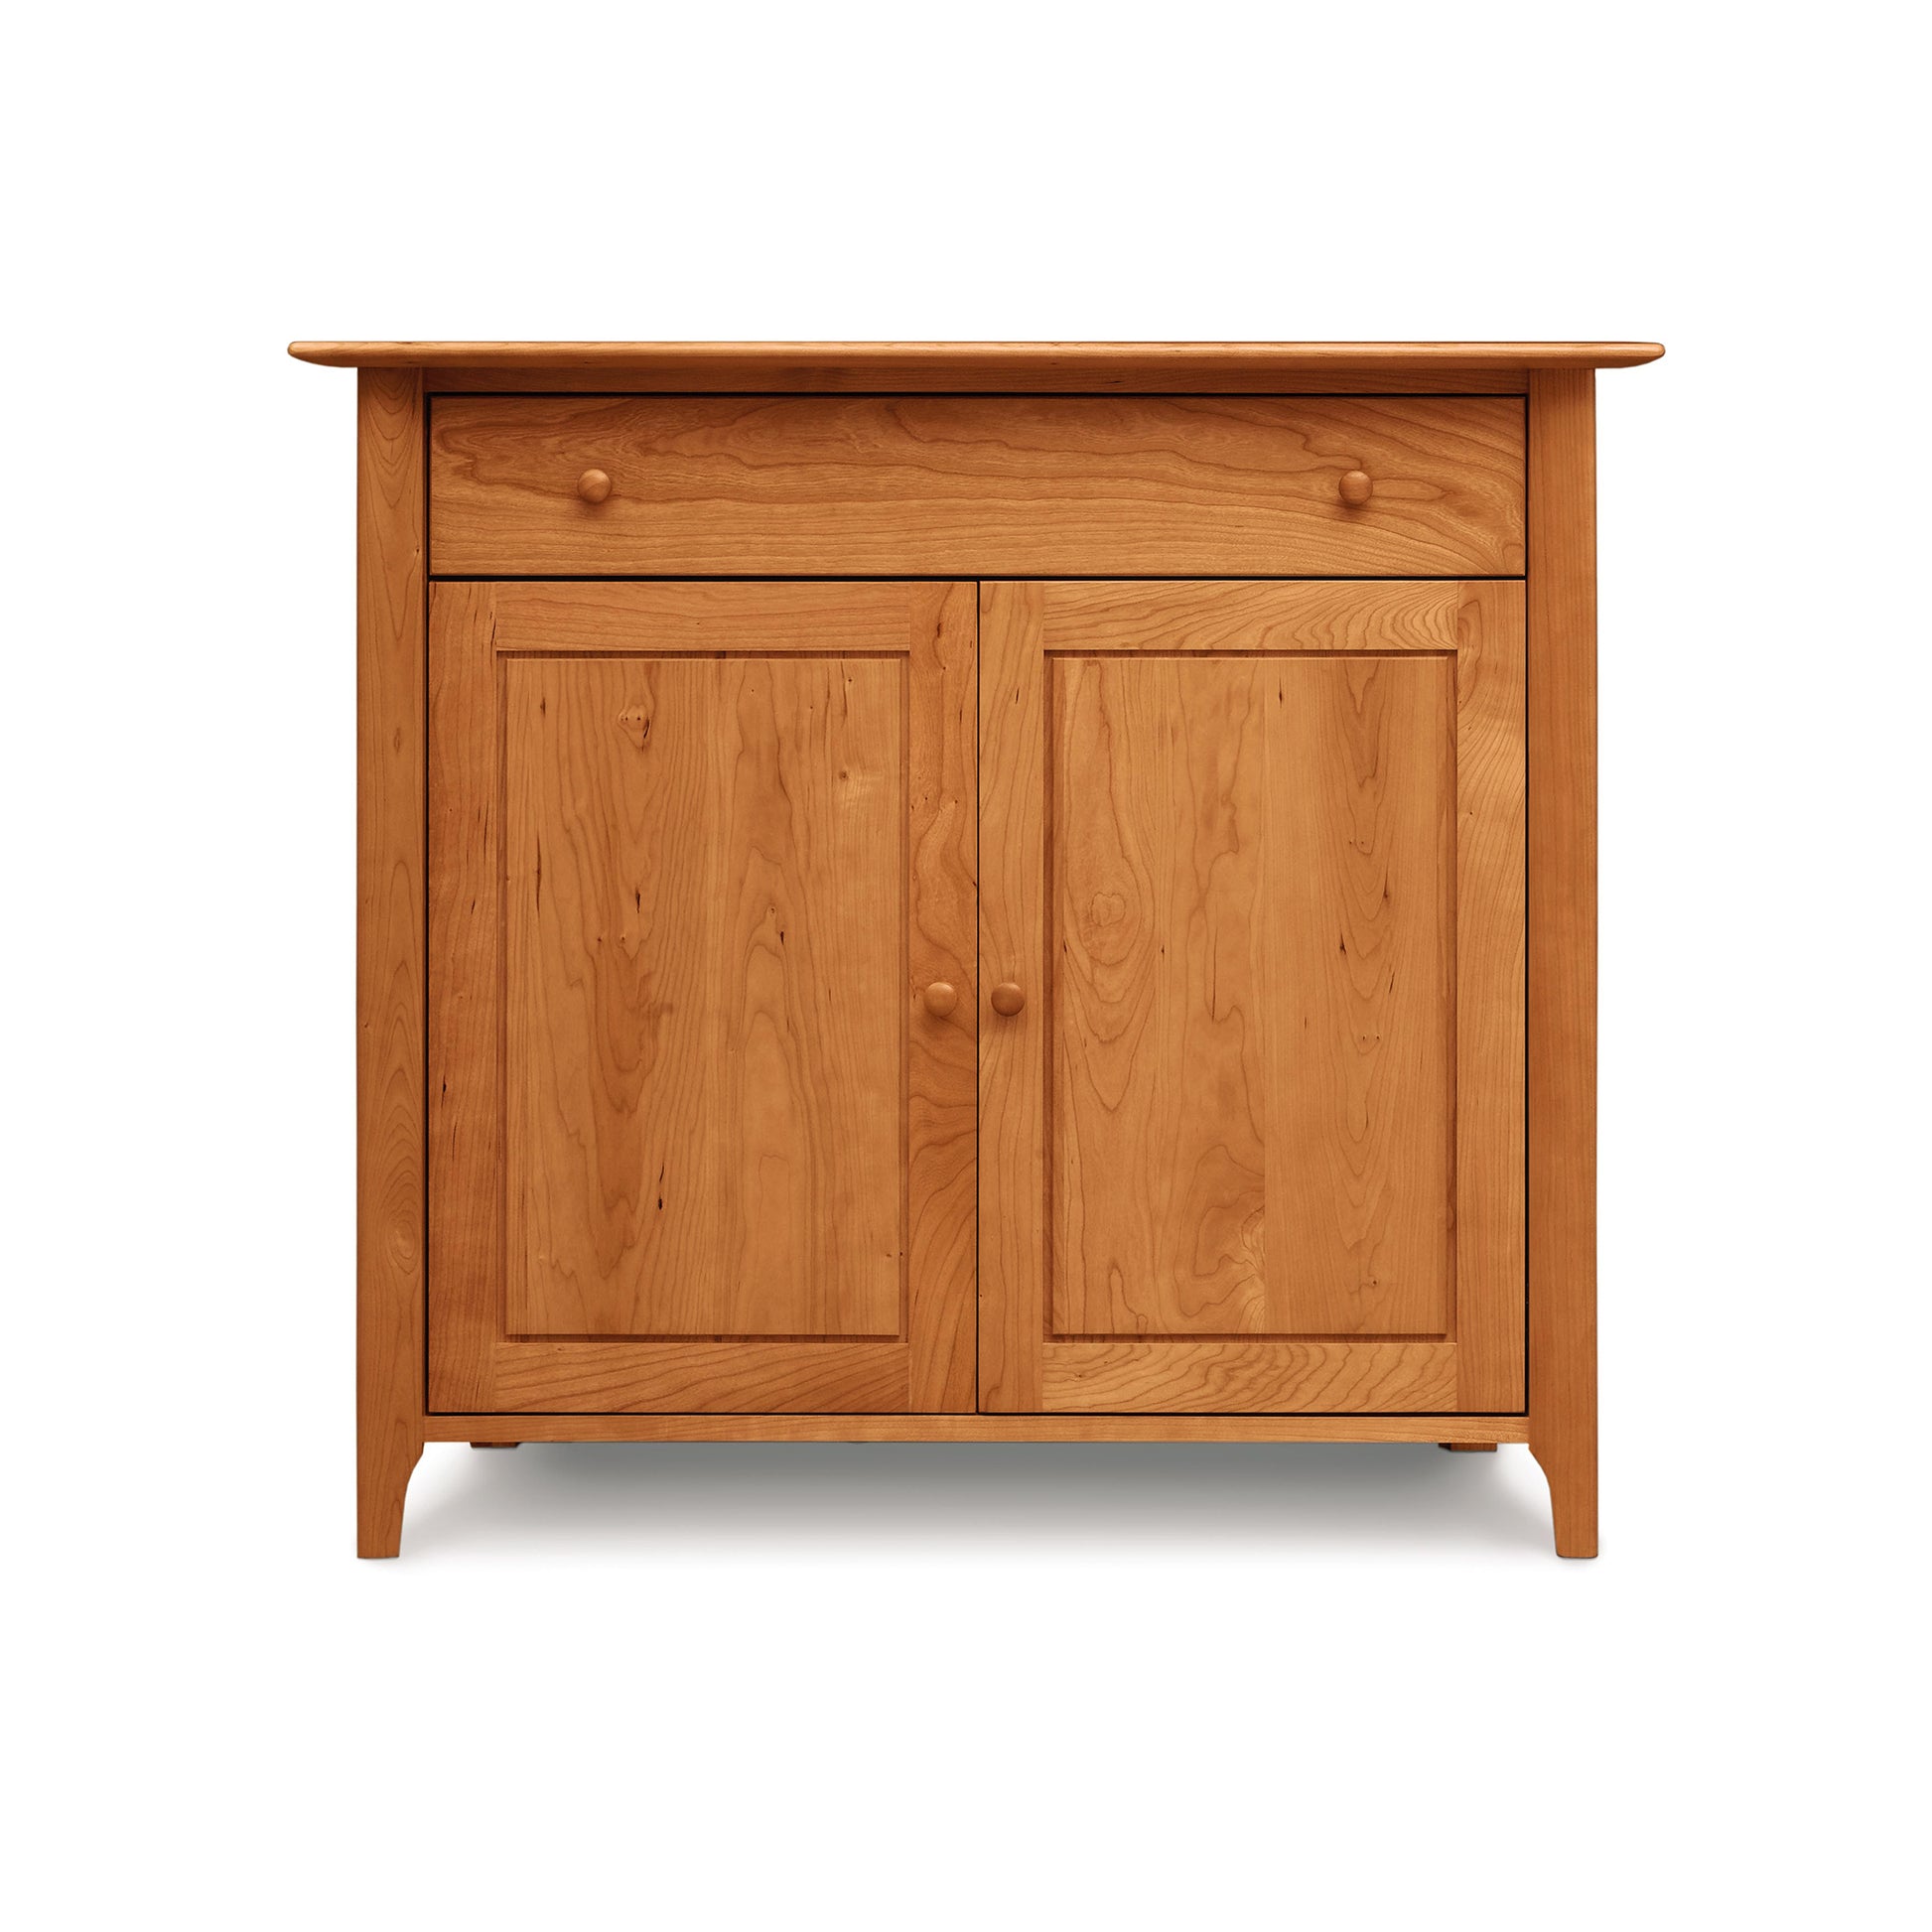 Solid wood cabinet with two doors and a single drawer, set against a white background.Copeland Furniture's Sarah 1-Drawer, 2-Door Buffet